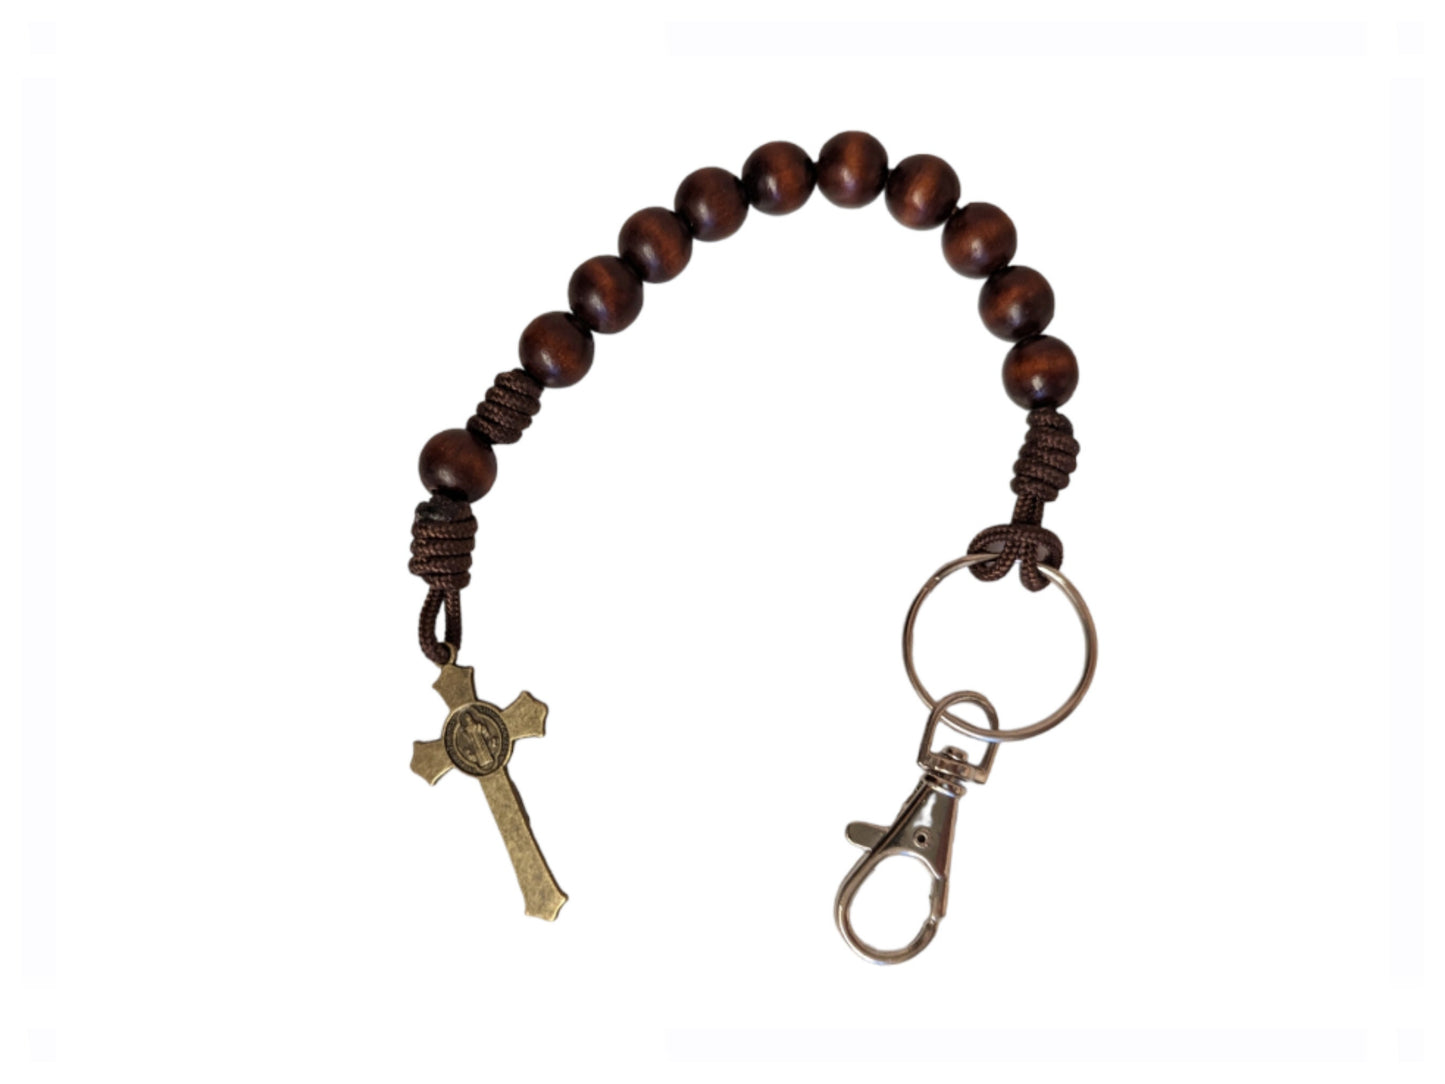 Paracord Brown Rosary keyring, One decade metal & knot Rosary, Strong, Catholic Rosary, Pilgrimages, Knotted Rosary, Unbreakable, Waterproof